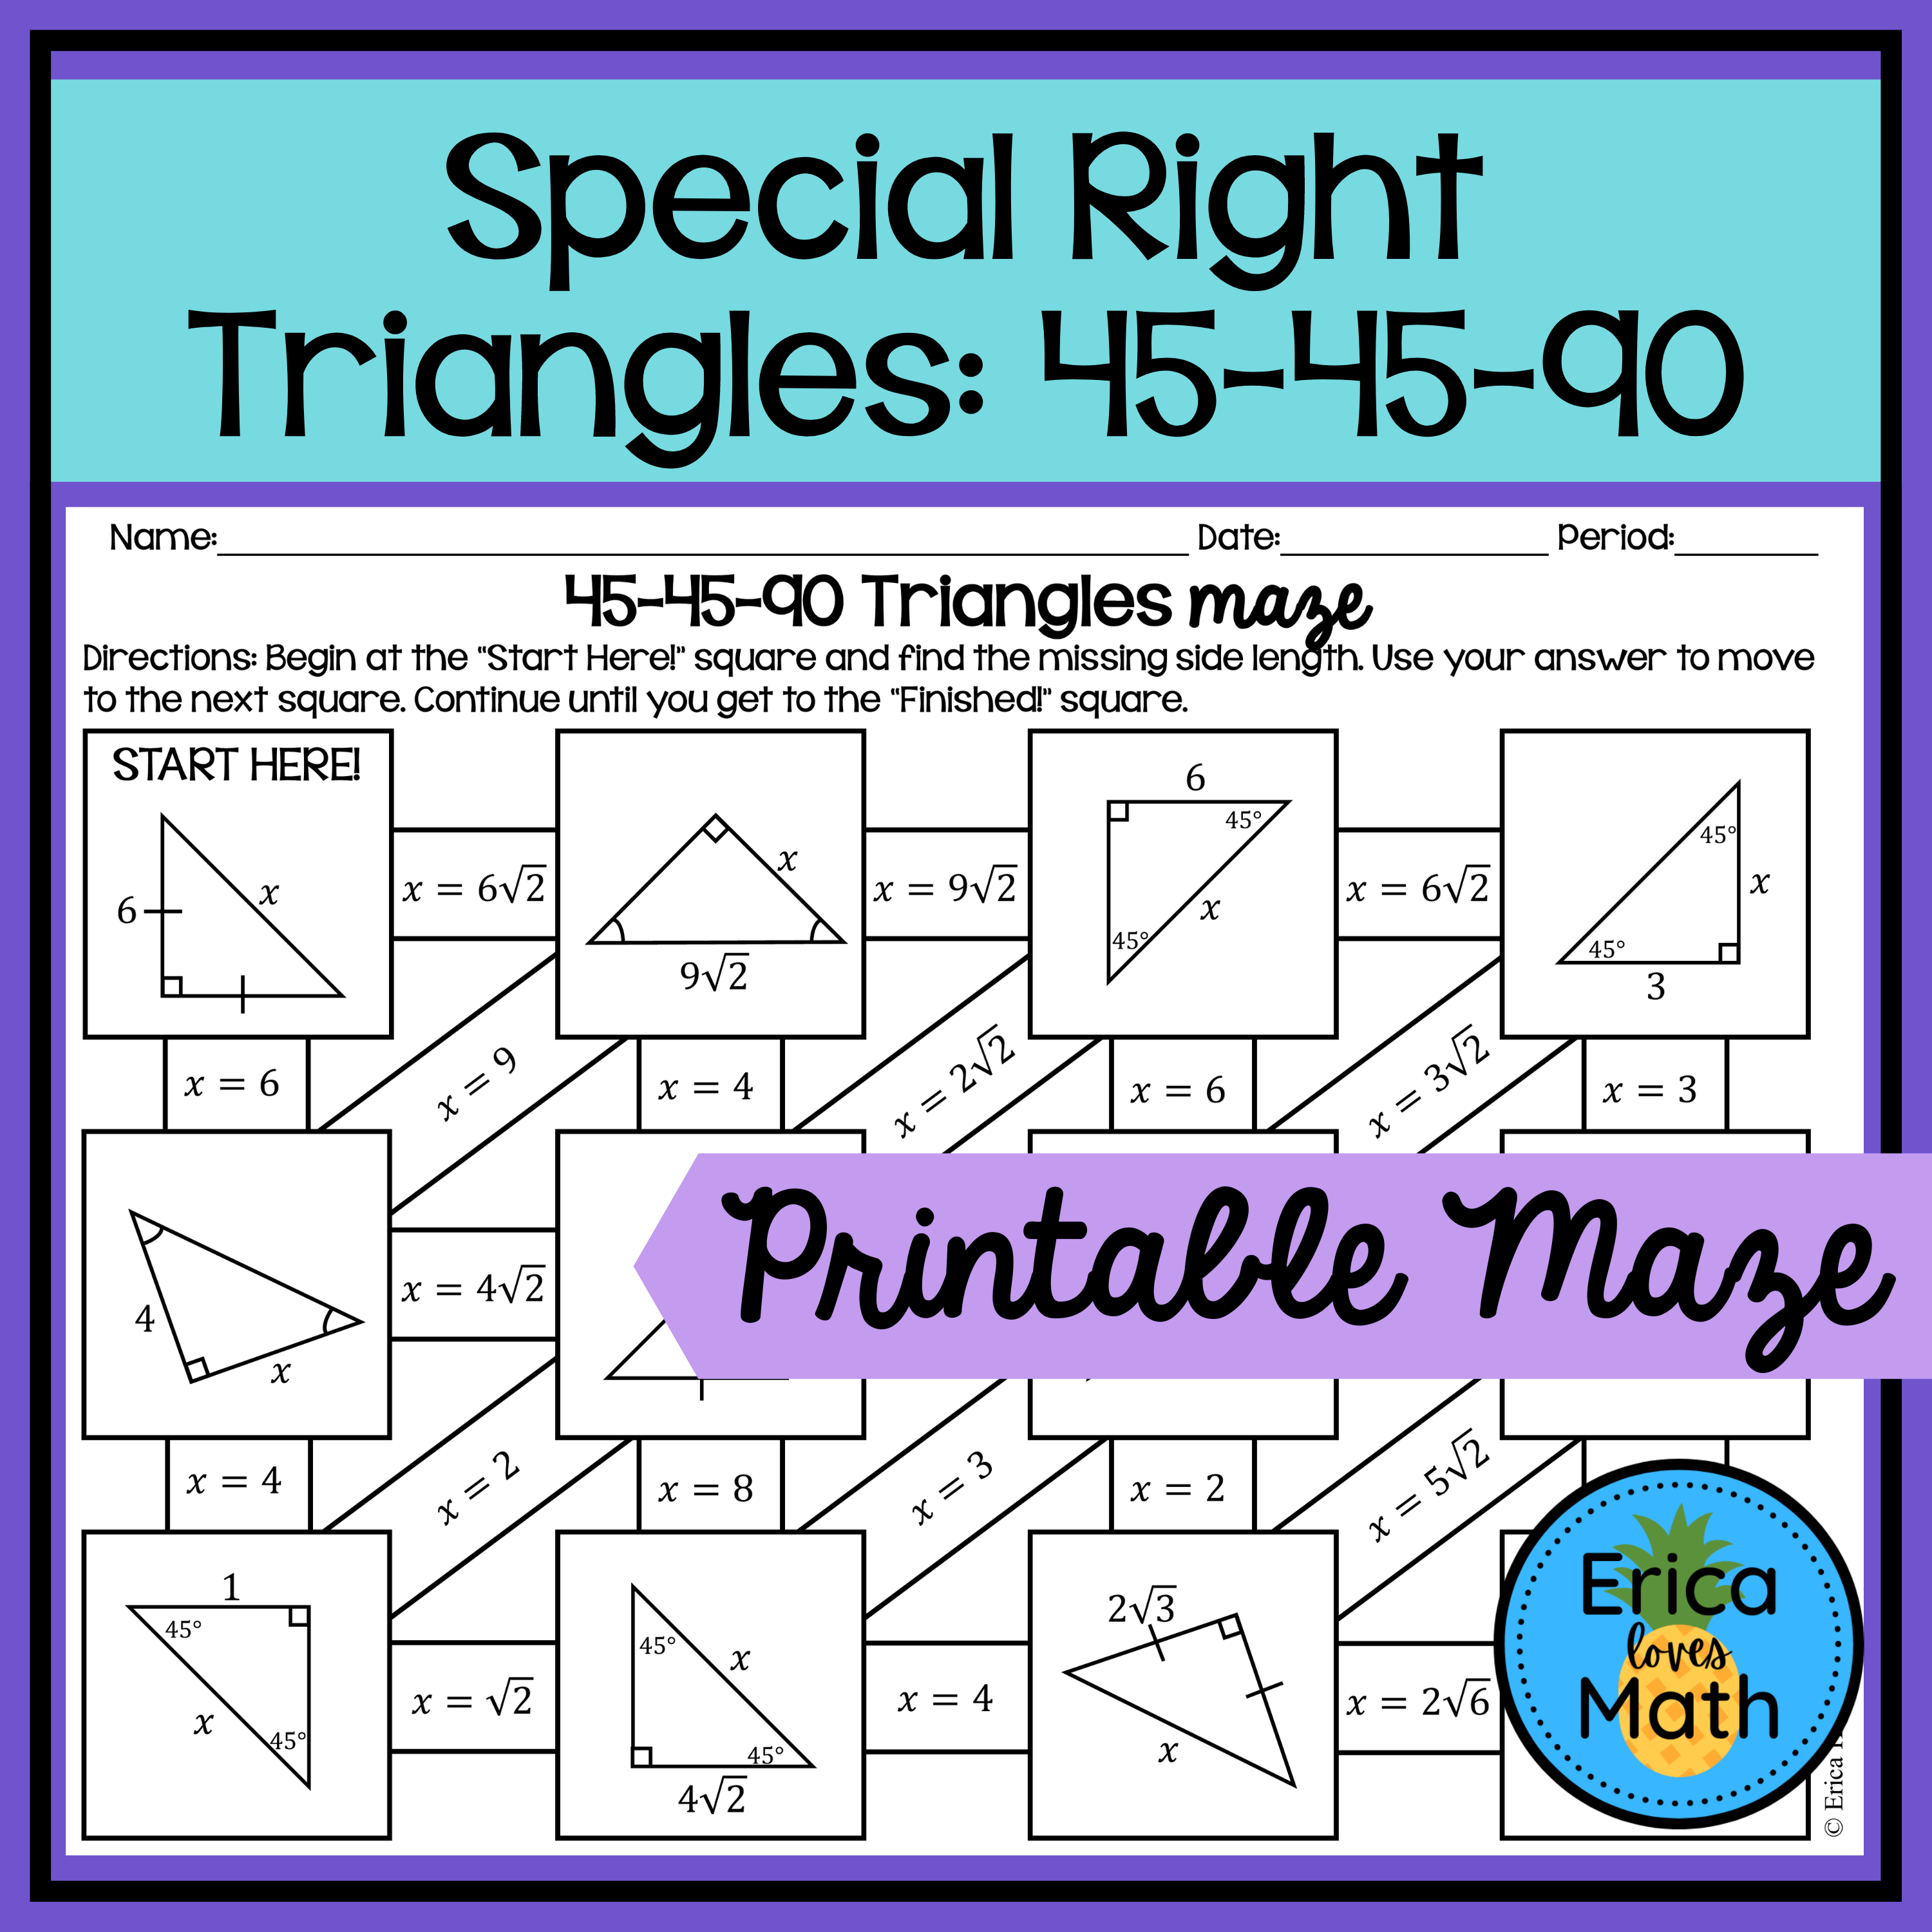 45 45 90 Special Right Triangles Activity Maze Classful 3625